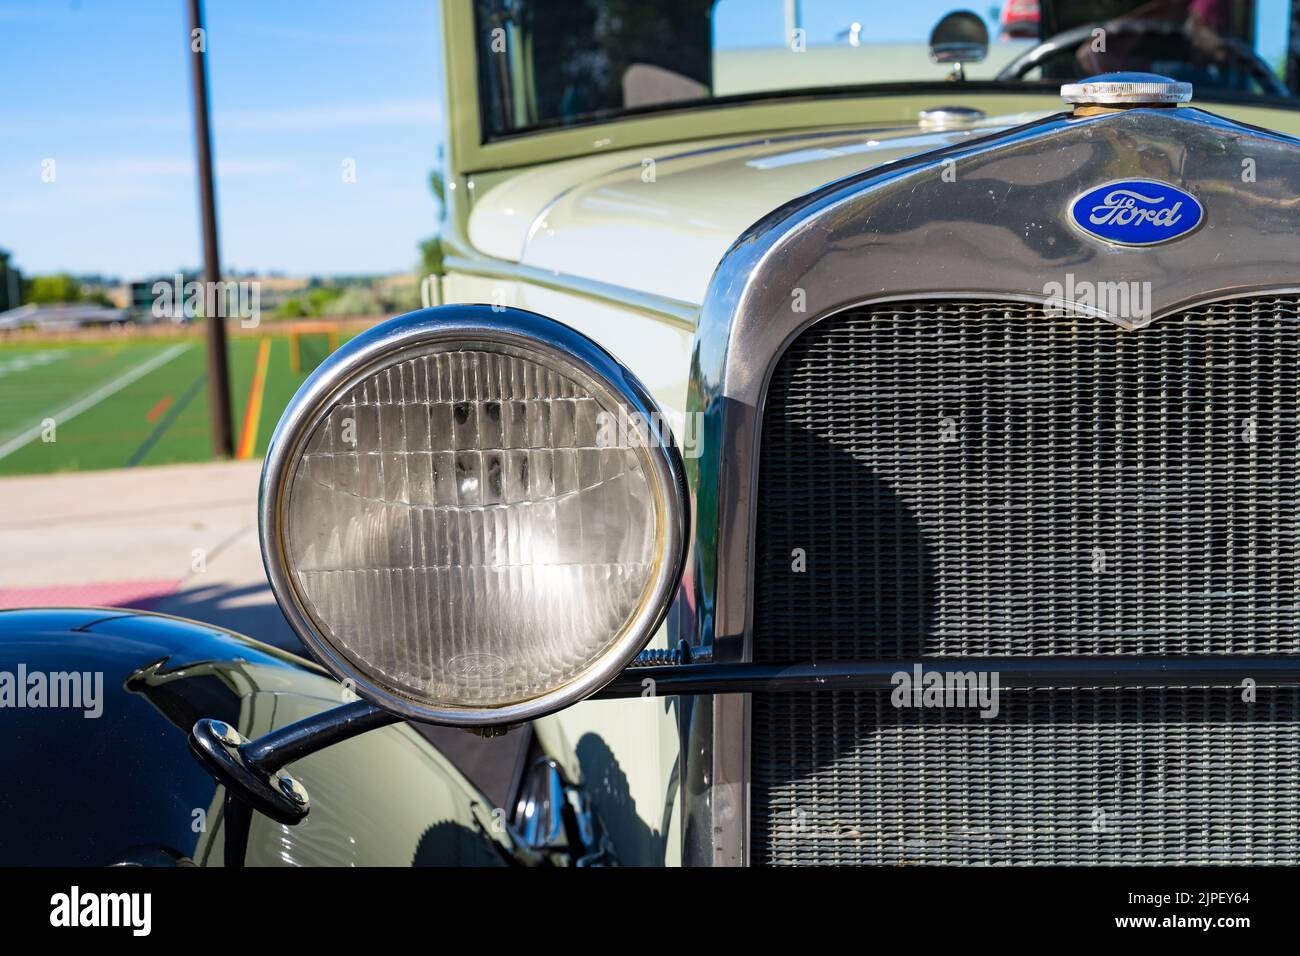 Loveland, CO - July 9,2022: Front grille of an old antique Ford Model A automobile at the Loveland Classic Car Show Stock Photo